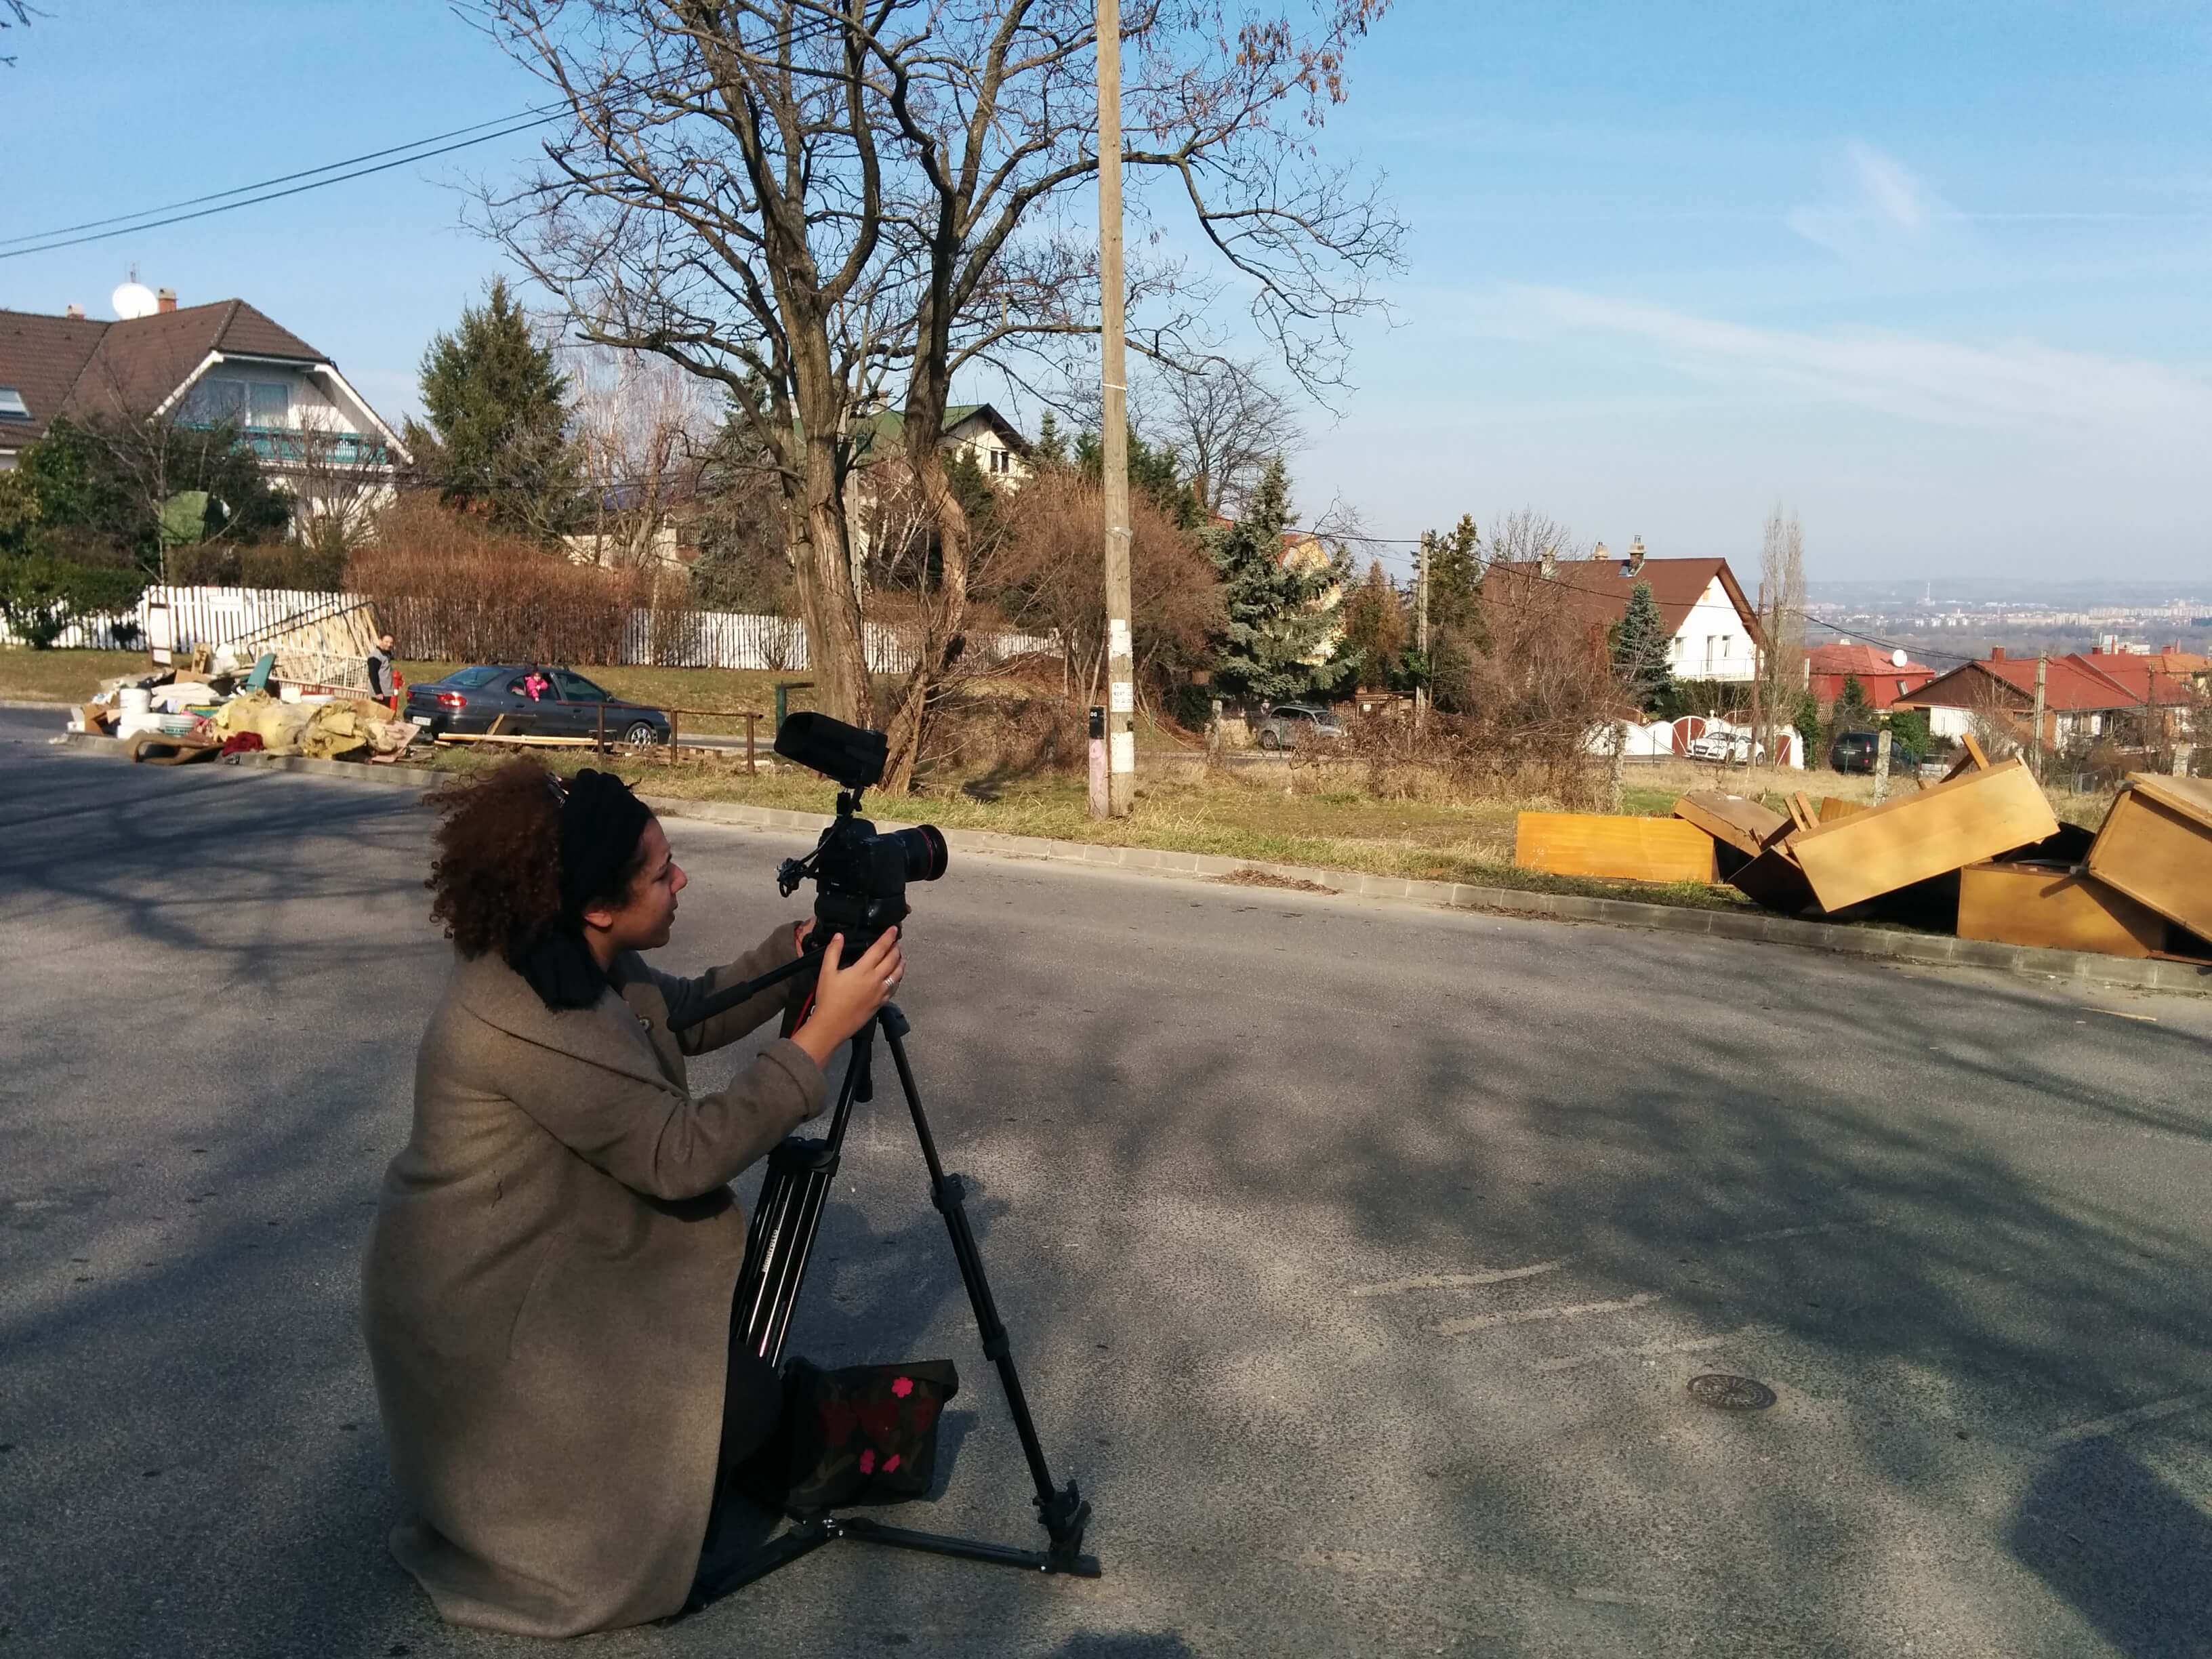 Farah Kassem kneels on a suburban street positioning a camera on a tripod. It's a sunny Autumn day. Color photograph.